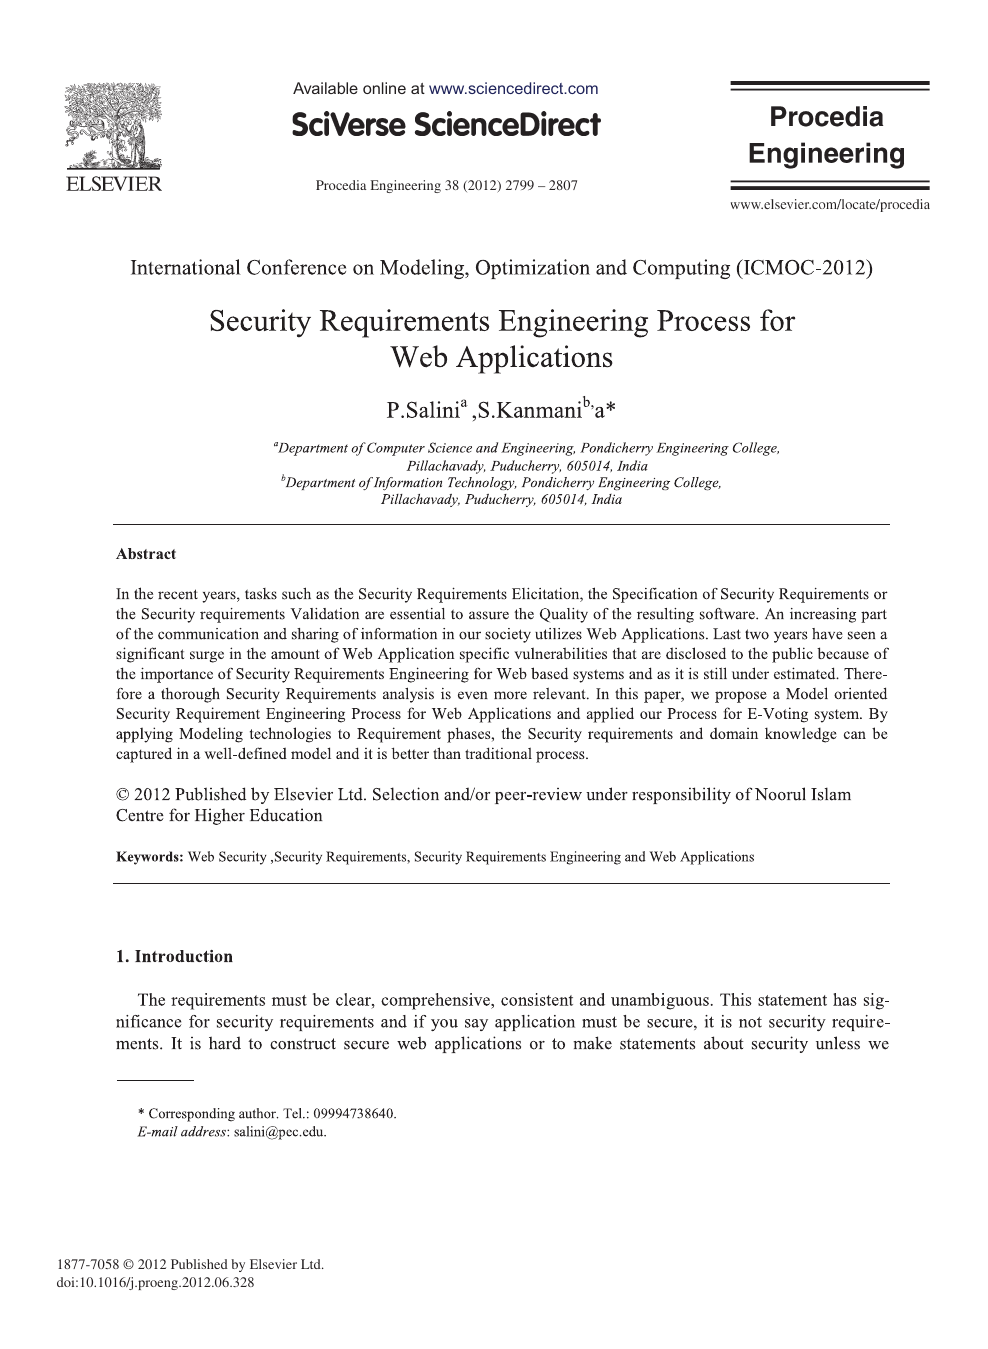 Security Requirements Engineering Process For Web Applications